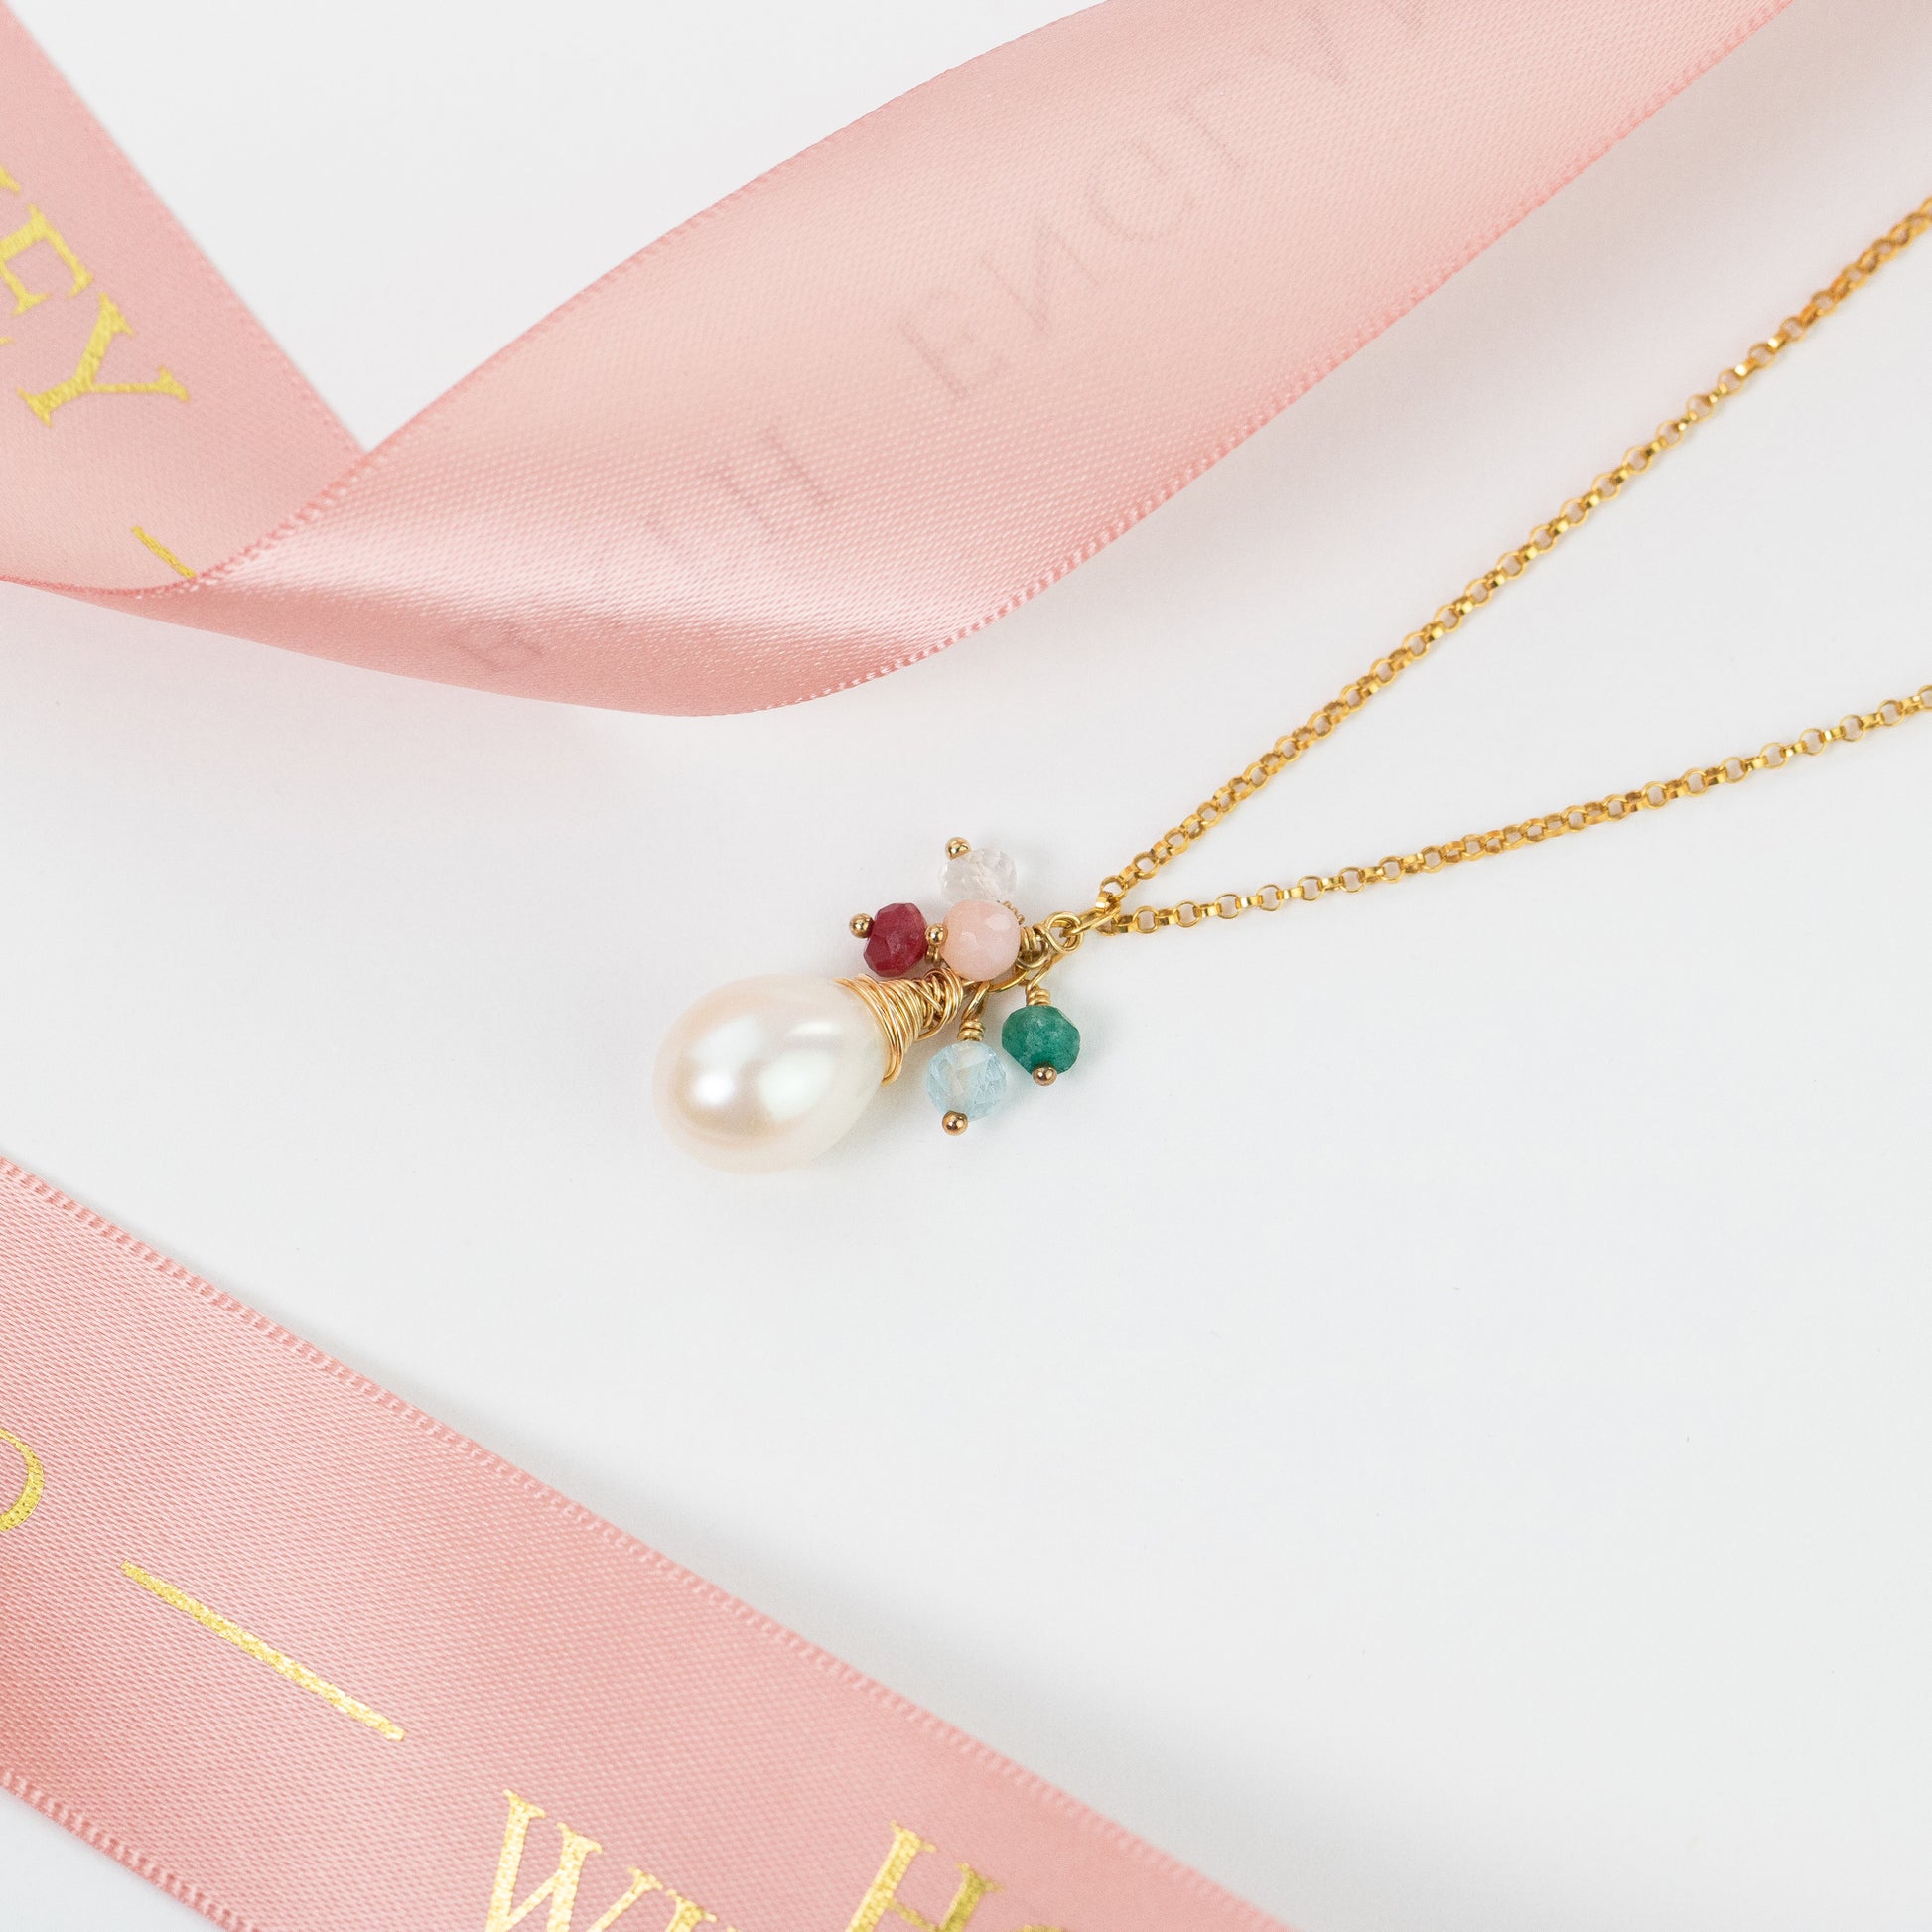 Christmas Gift for Mum - Family Birthstone Necklace with Freshwater Pearl - Silver & Gold